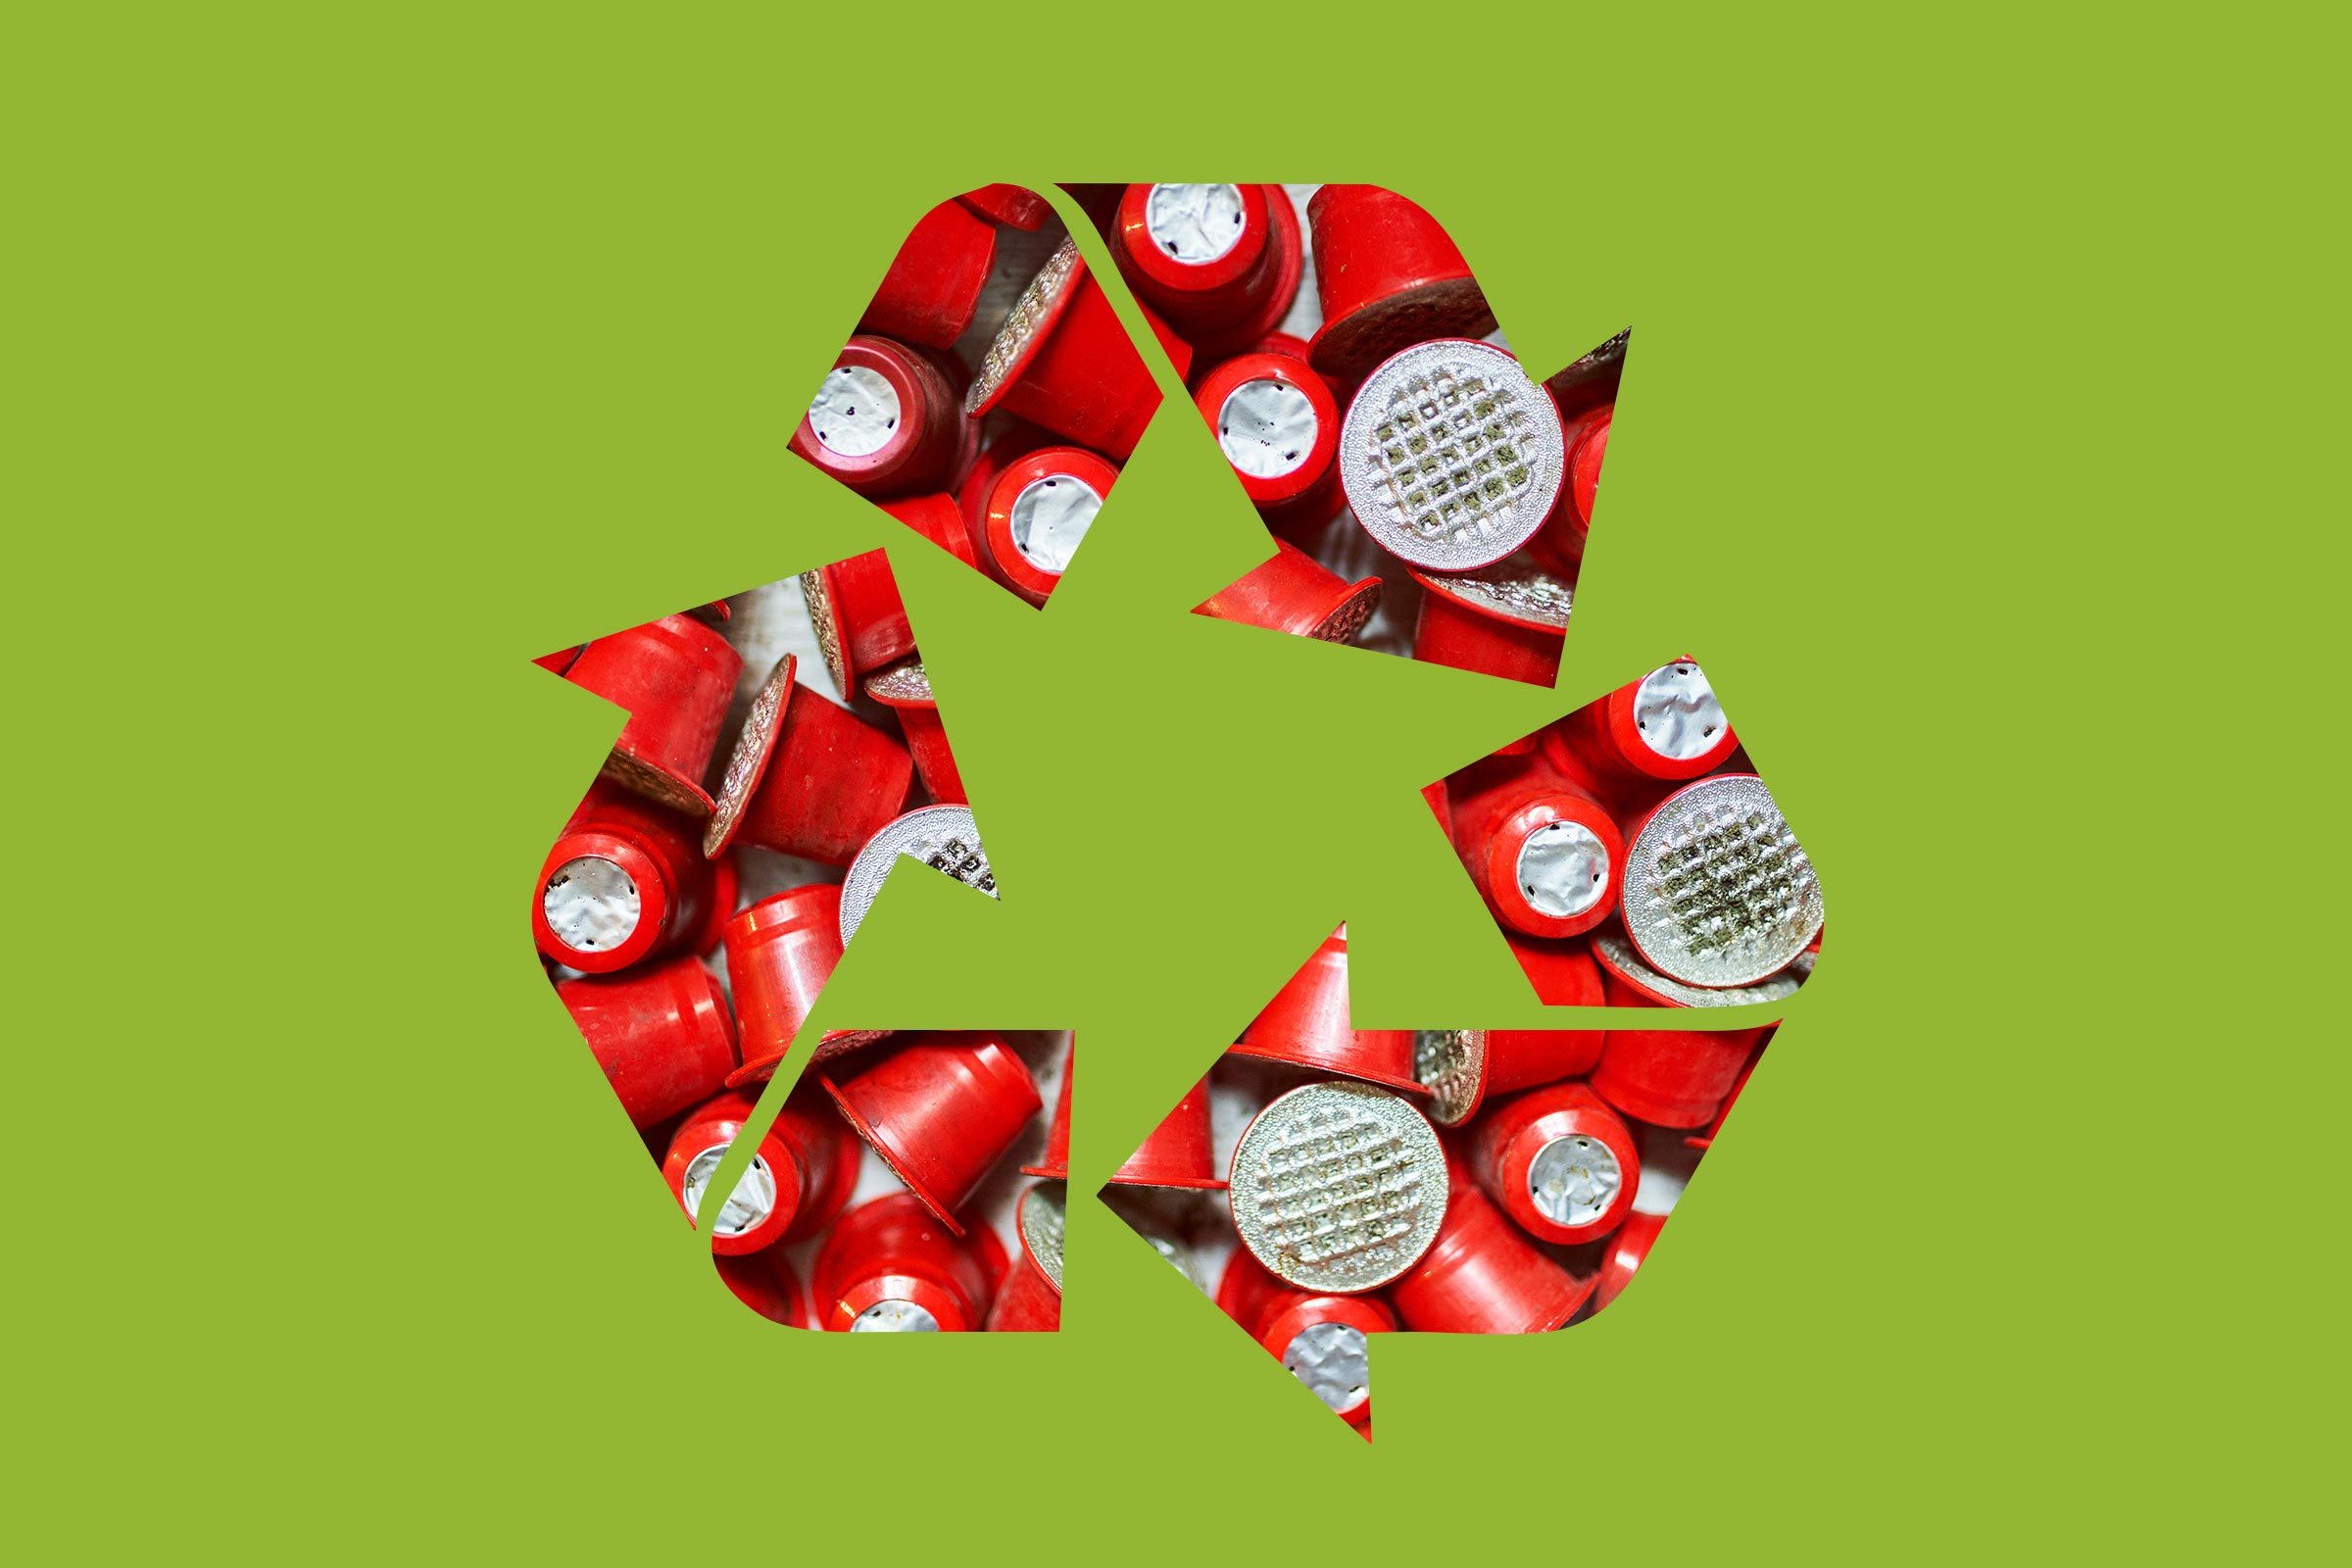 nespresso coffee pods in a recycle symbol on a green background